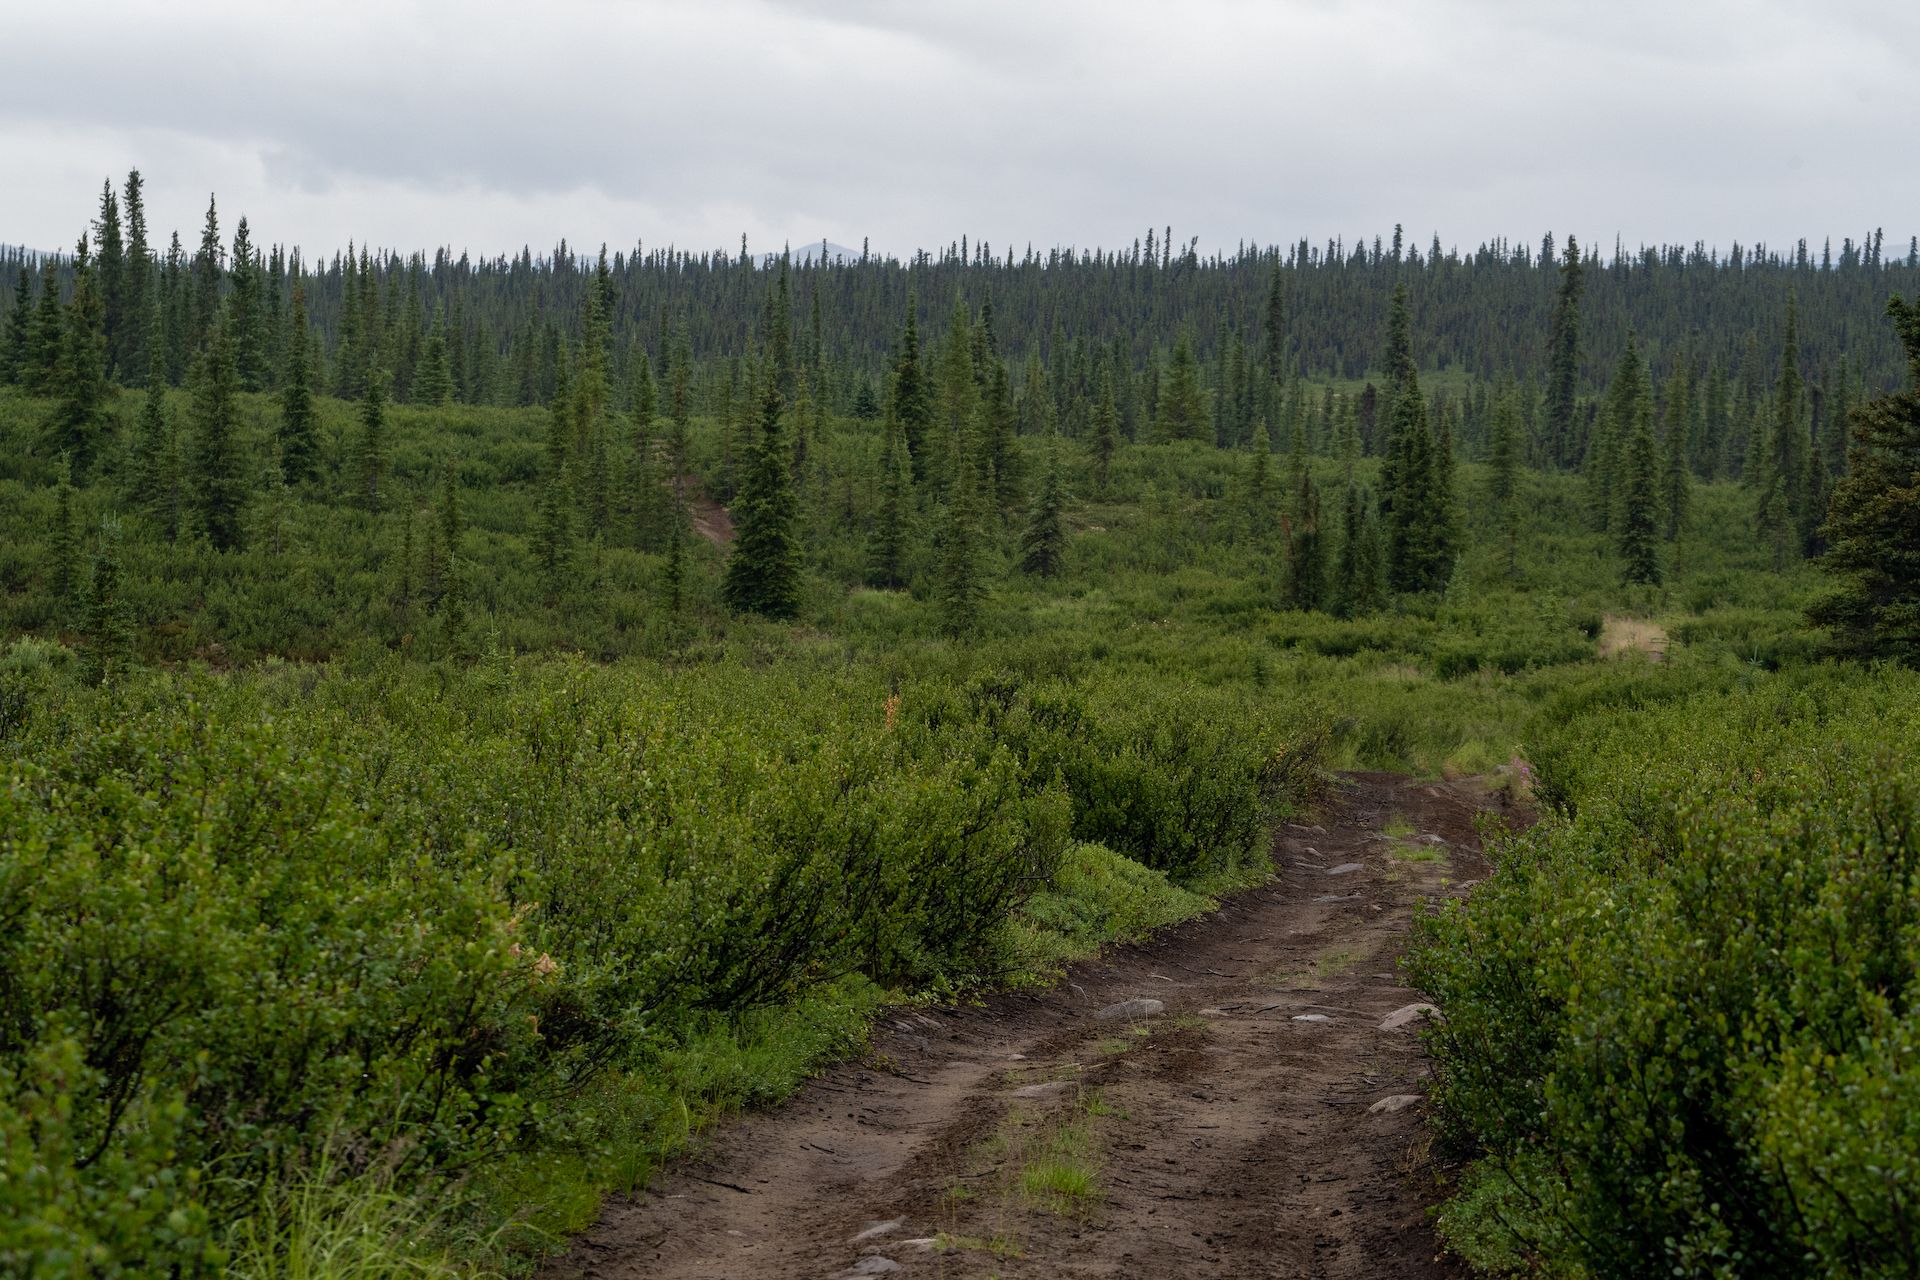 We then followed a narrow dirt road in the tundra to find a quiet and pristine campsite for the night near the Denali Highway.